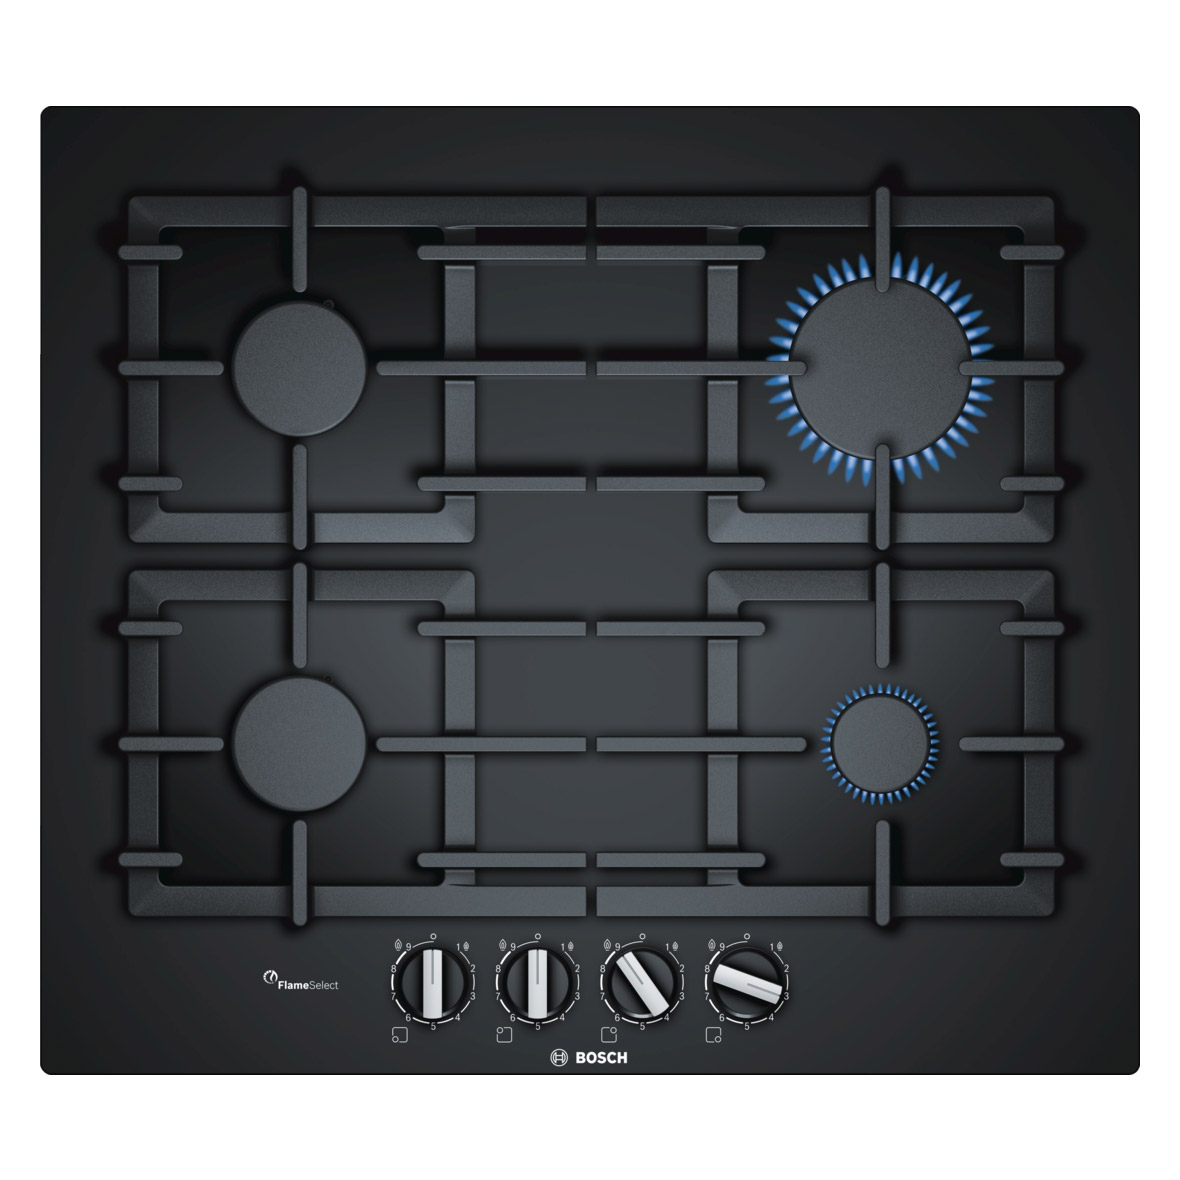 Image of Bosch PPP6A6B90 Series 6 60cm 4 Burner Gas Hob in Tempered Black Glass